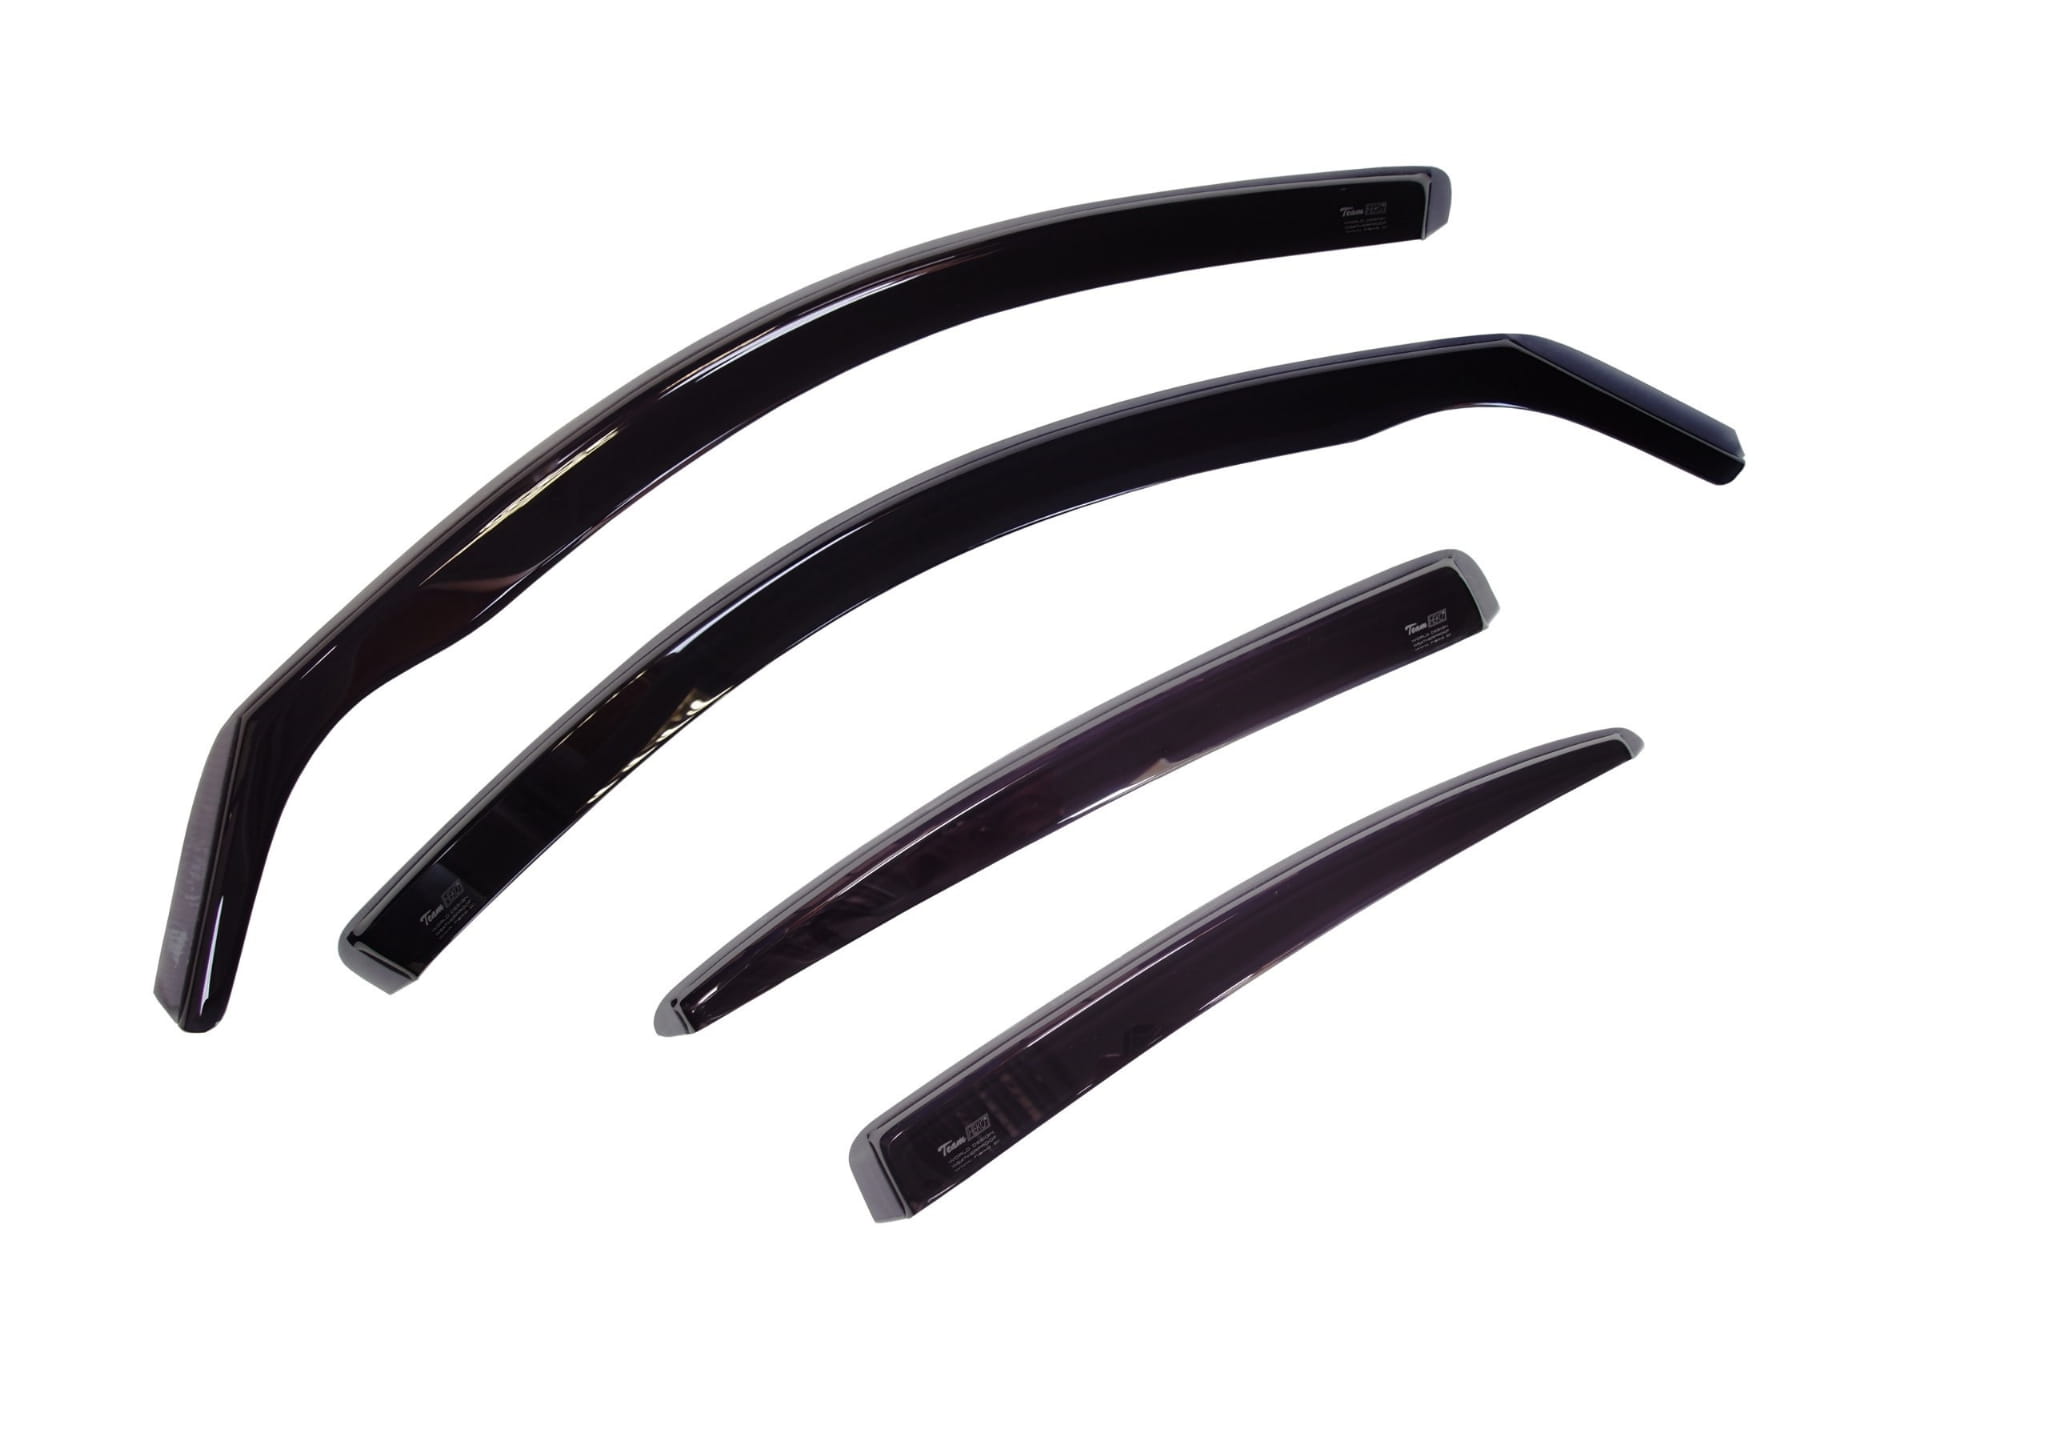 VW JETTA VI 2005-2011 5DR TEAM HEKO Wind Deflectors 4PC Set, In the summer wind deflectors help cool the car down and reduce outside noise from an open window when driving.